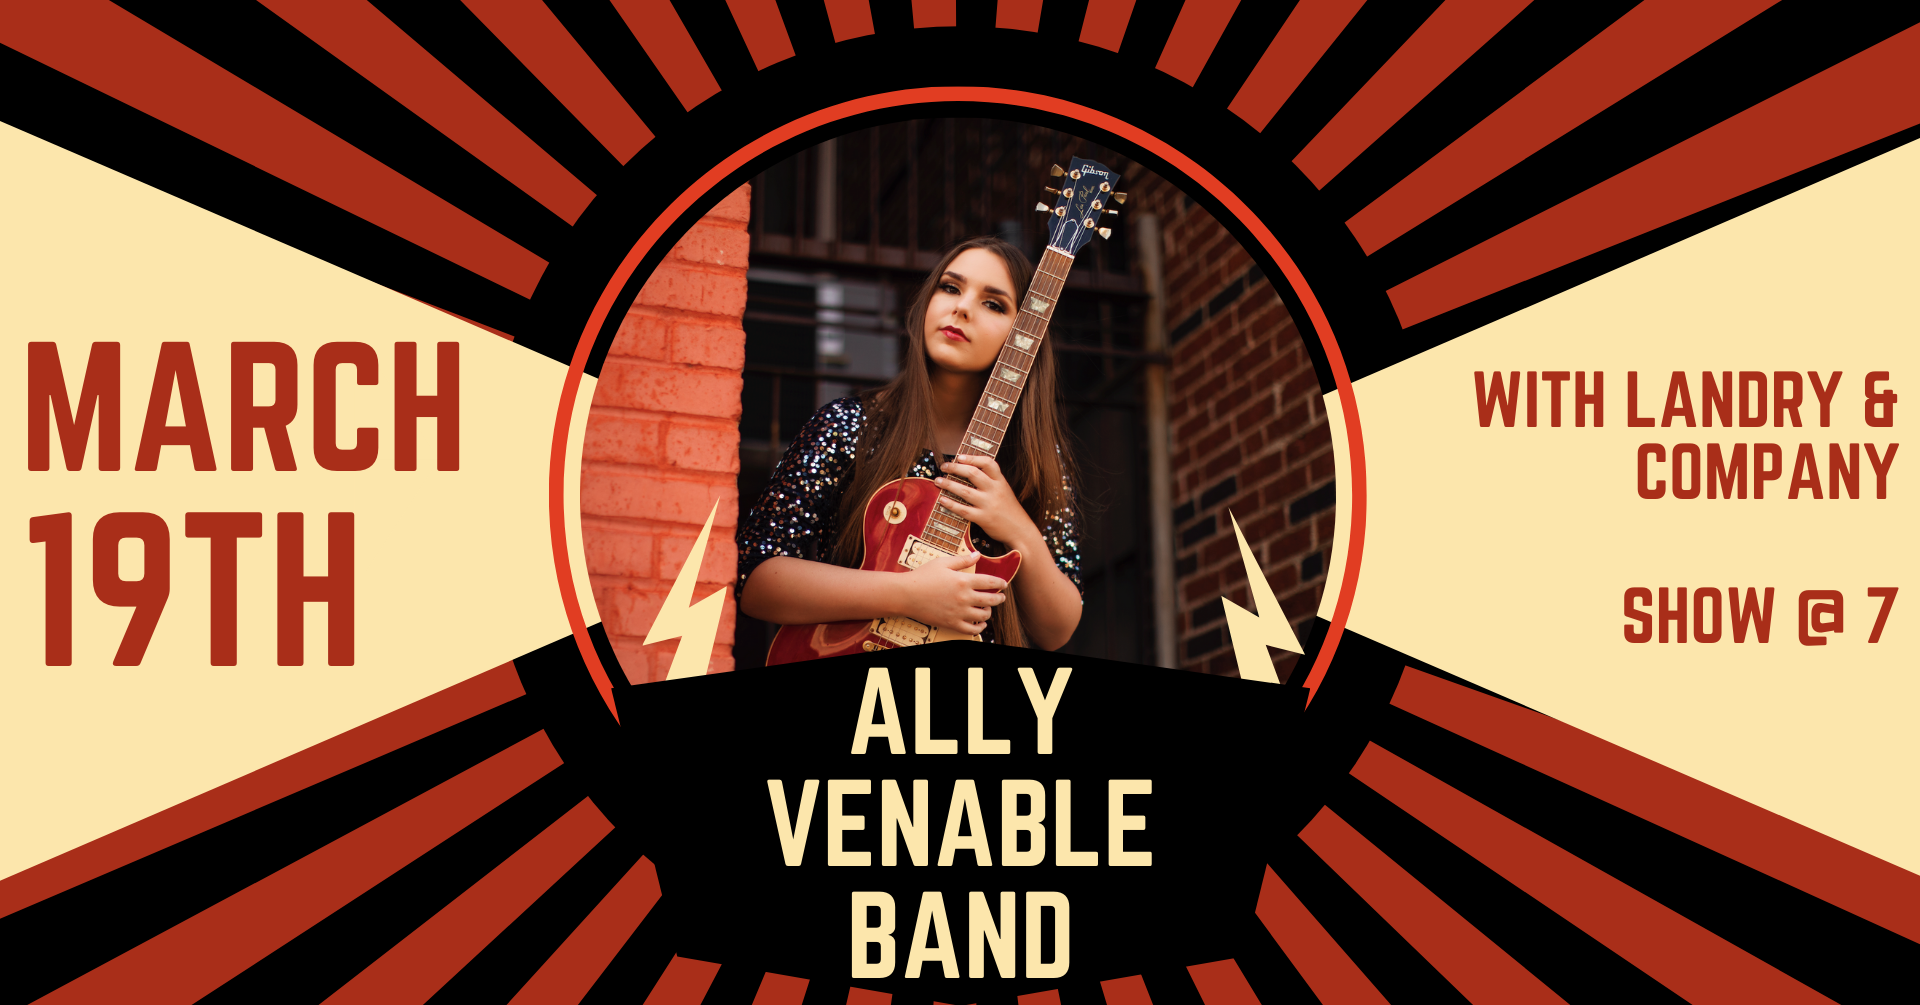 Ally Venable LIVE at The Texan